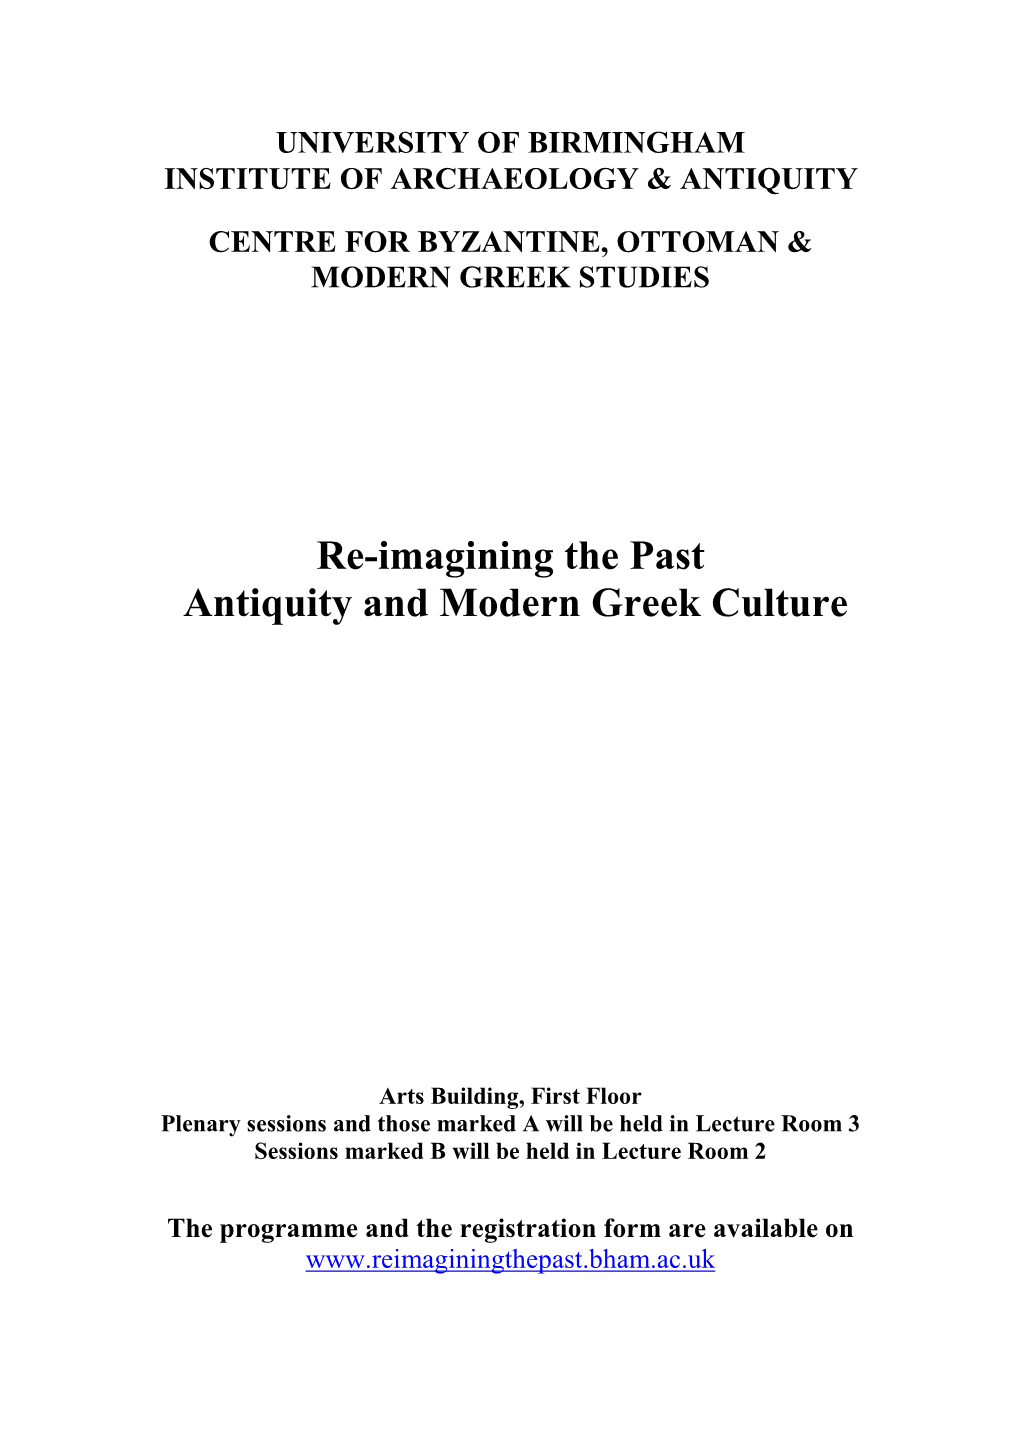 Re-Imagining the Past Antiquity and Modern Greek Culture